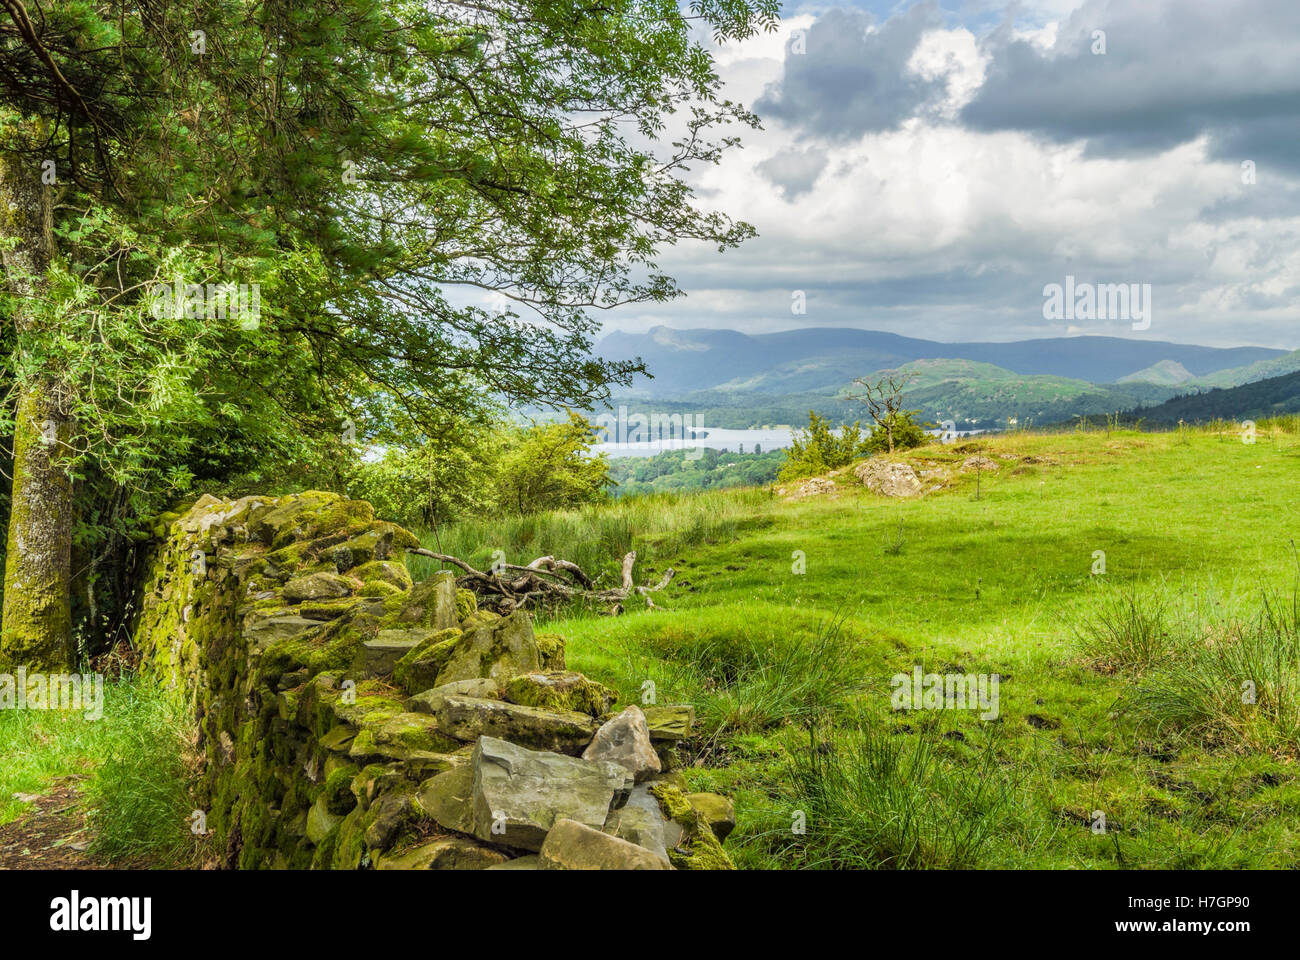 Landscape at the Lake District, also known as 'The Lakes' or Lakeland, North West England. Stock Photo